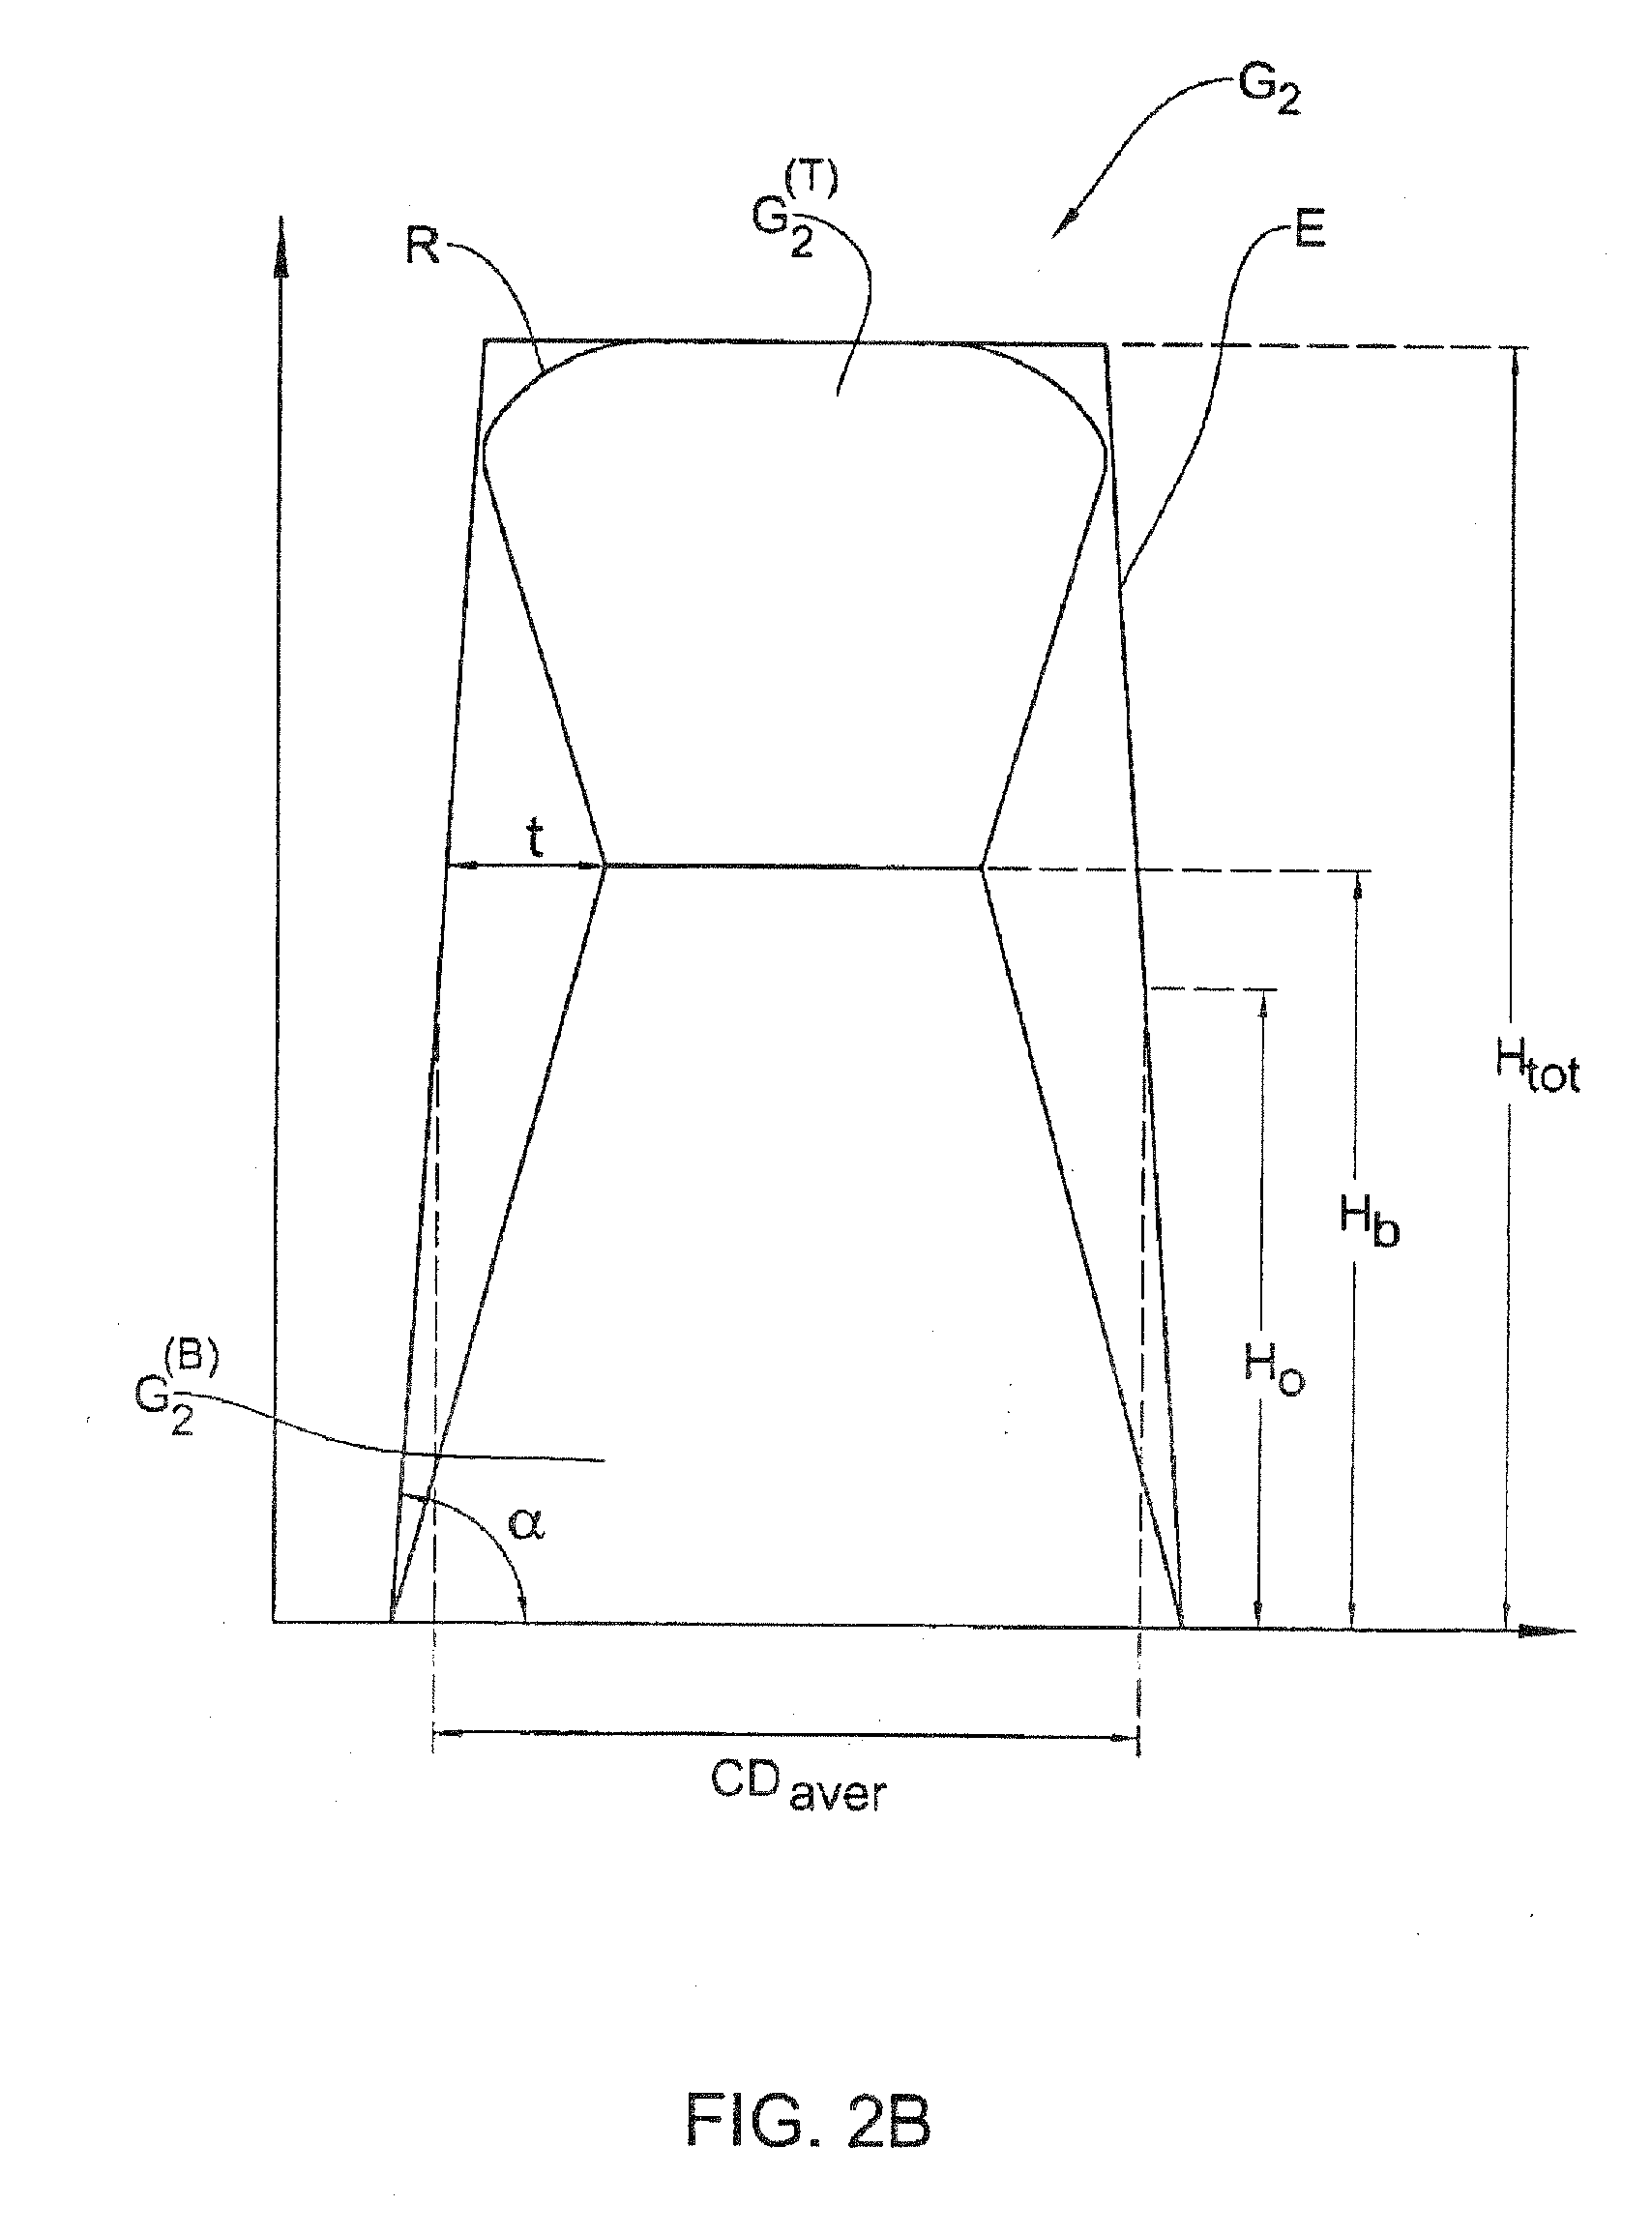 Method and system for measuring patterned structures